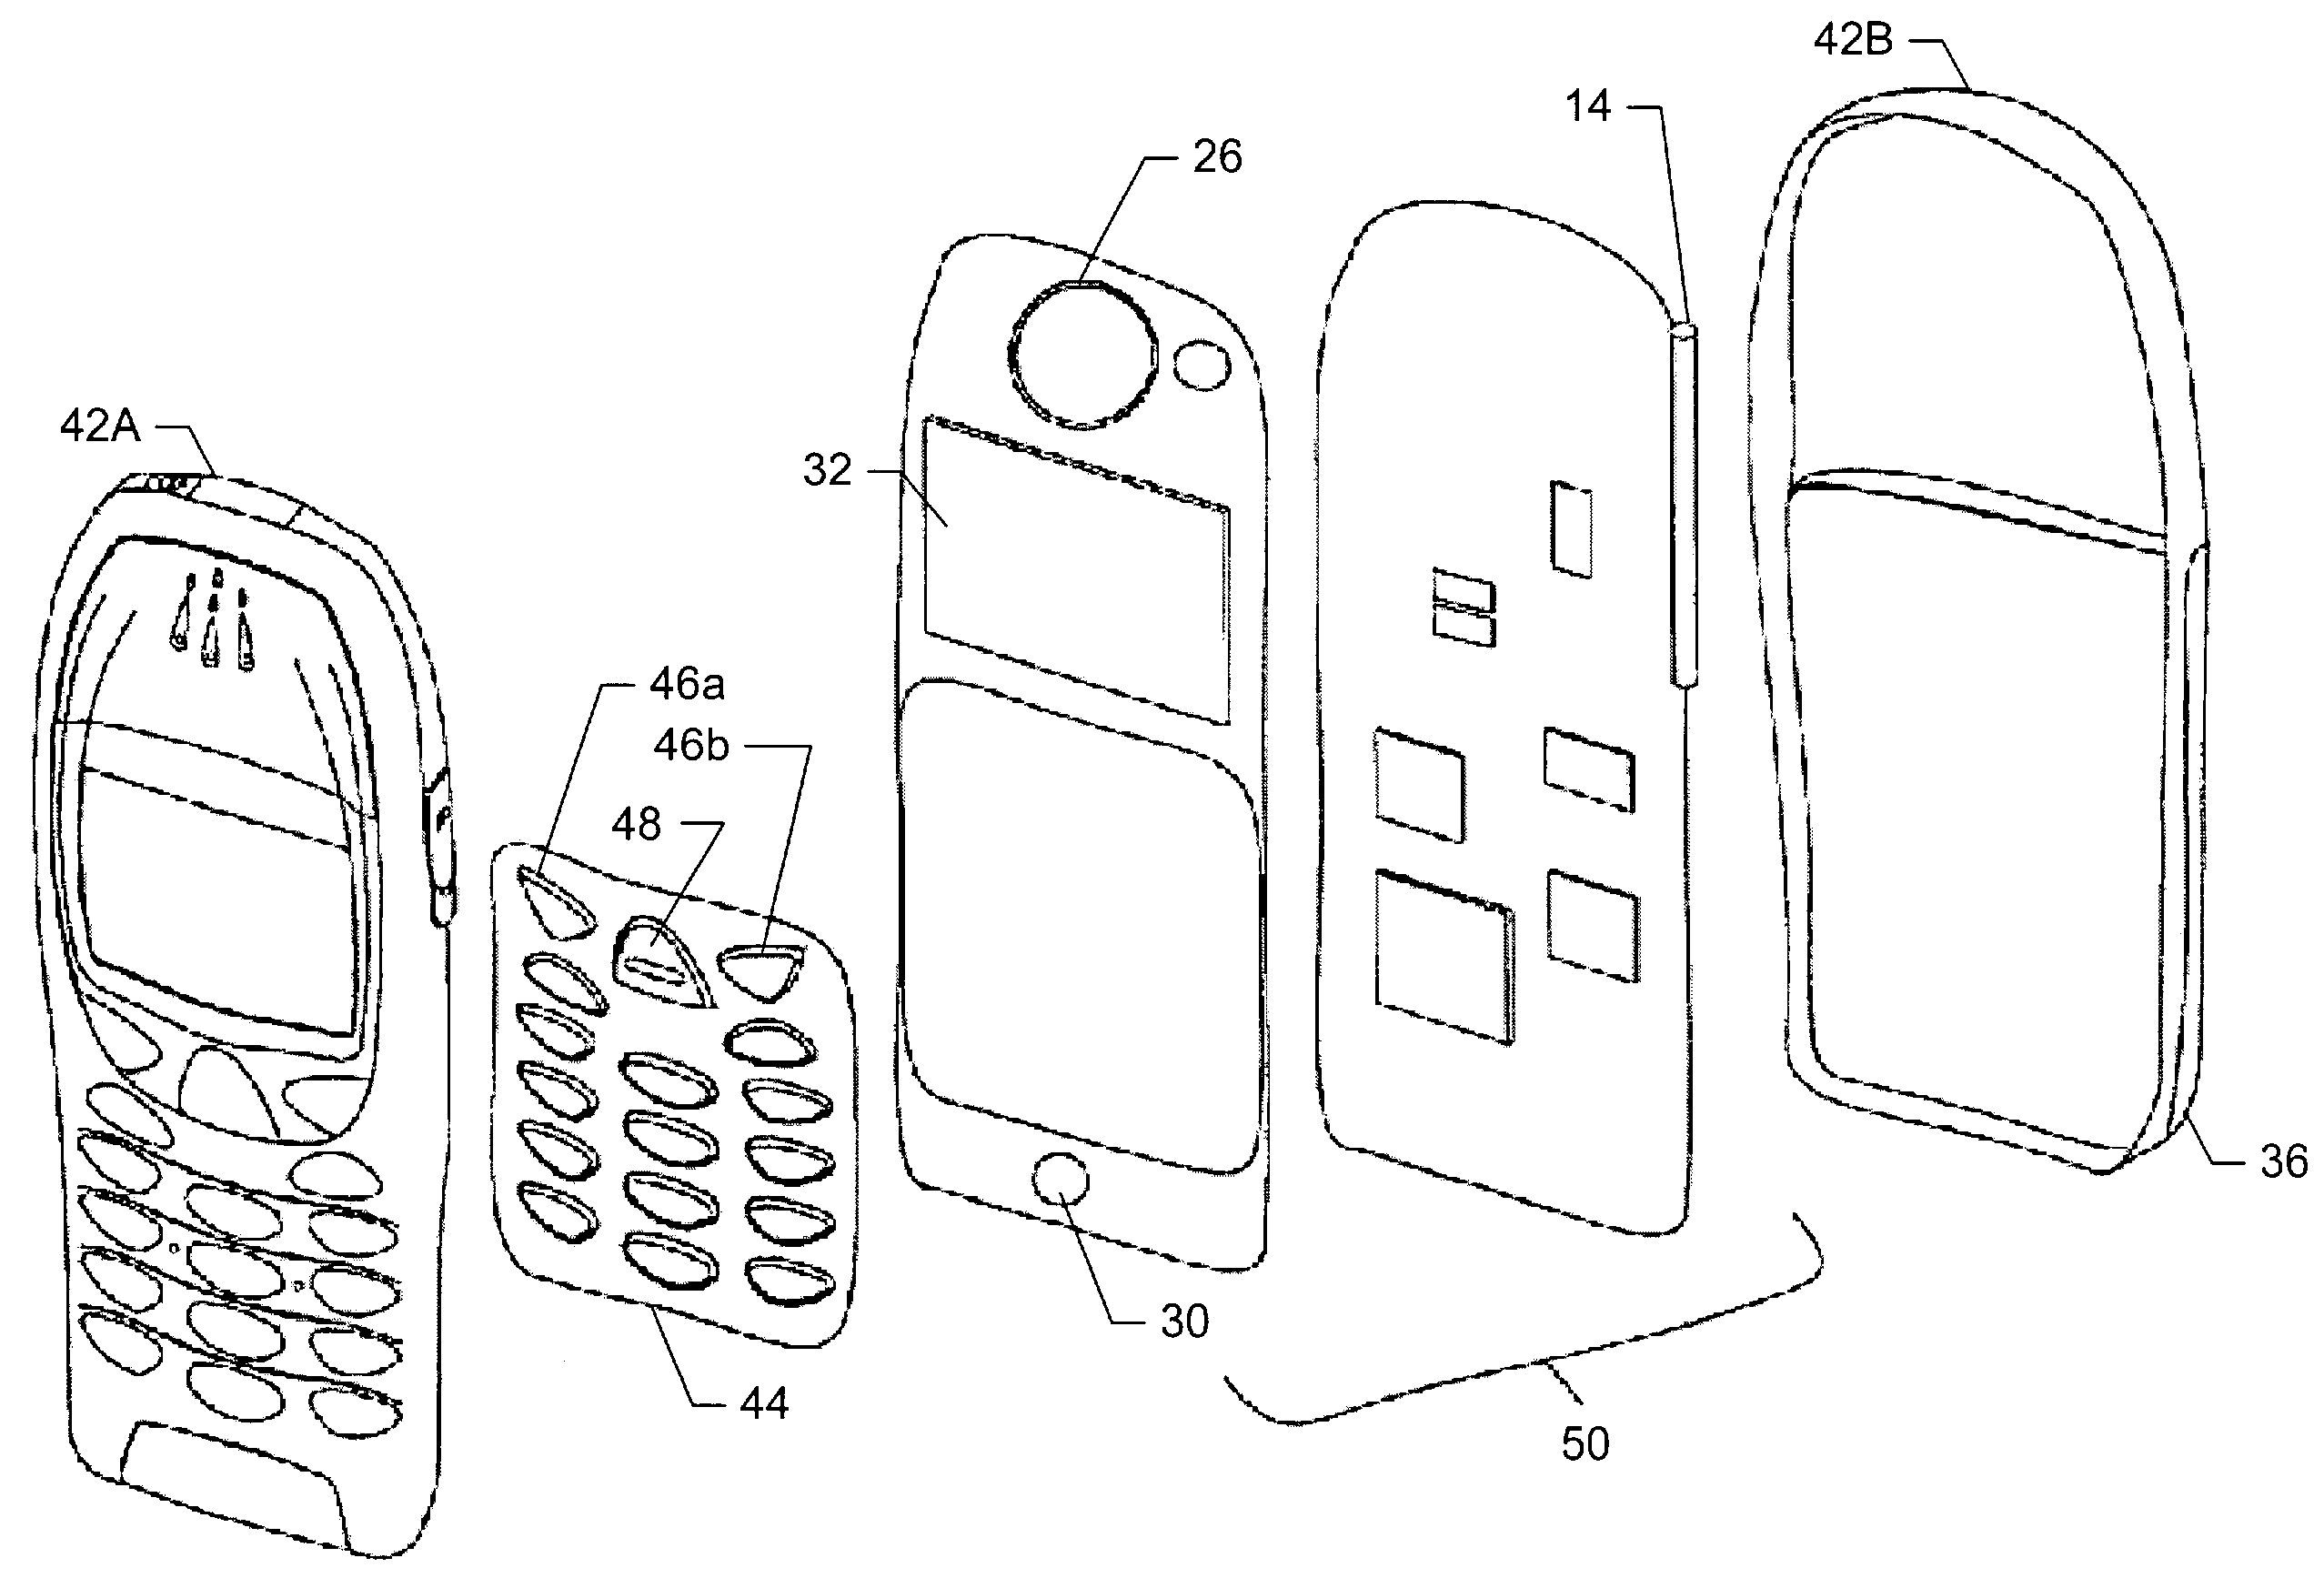 Systems and methods for recycling of cell phones at the end of life